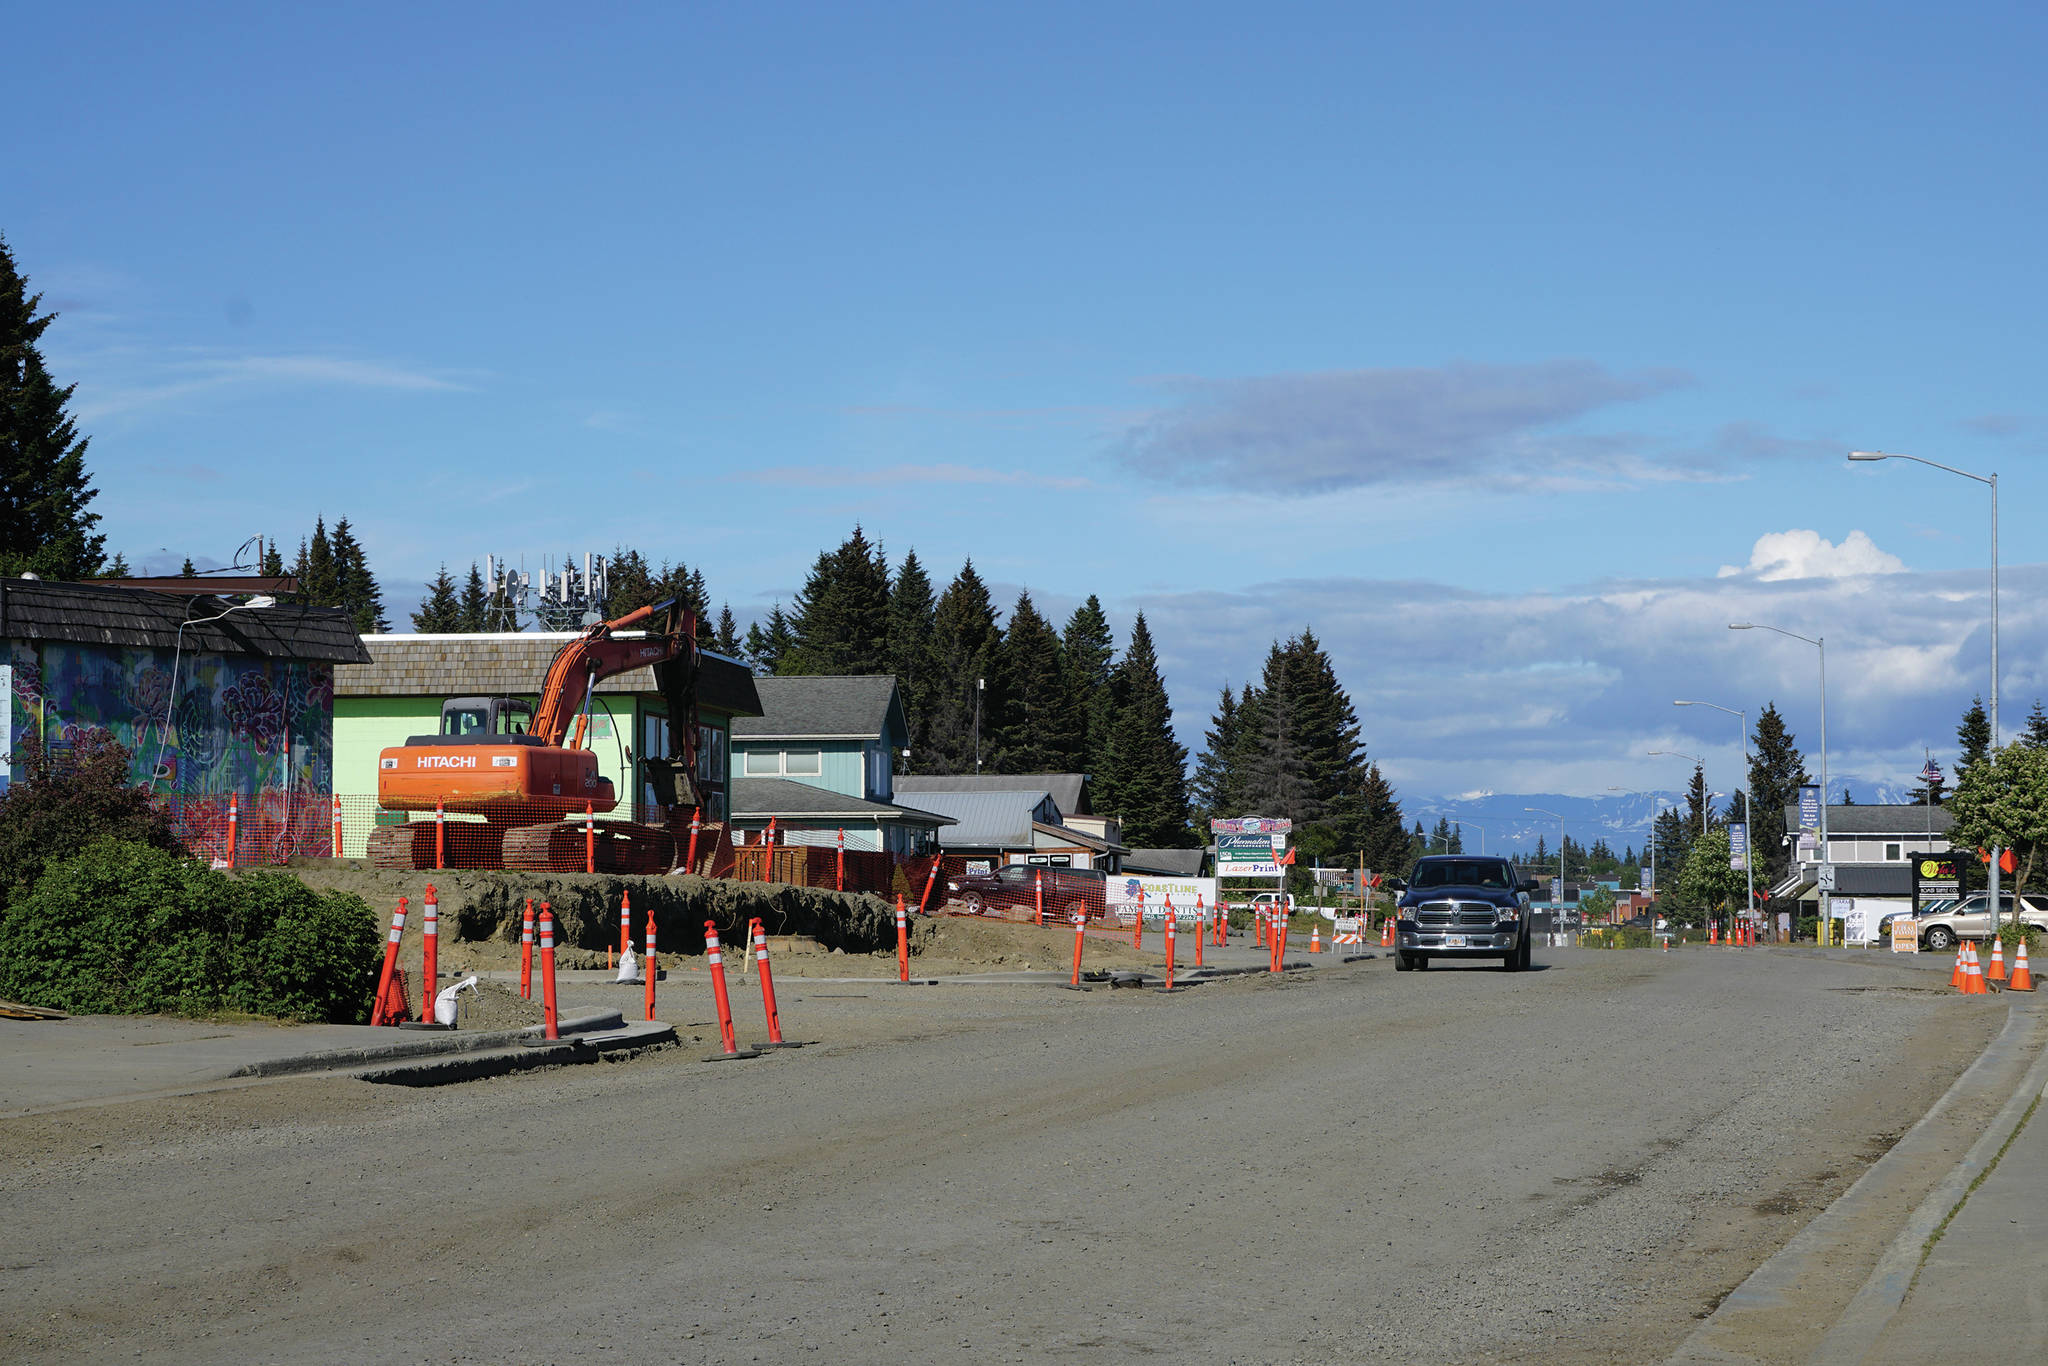 A driver heads west on Pioneer Avenue at Svedlund Street on Monday, June 22, 2020, in Homer, Alaska. A retaining wall at the intersection in front of the Pioneer Car Wash was moved back and a utility pole removed to create a better sight line at the corner, part of a repaving project for Pioneer Avenue. (Photo by Michael Armstrong/Homer News)